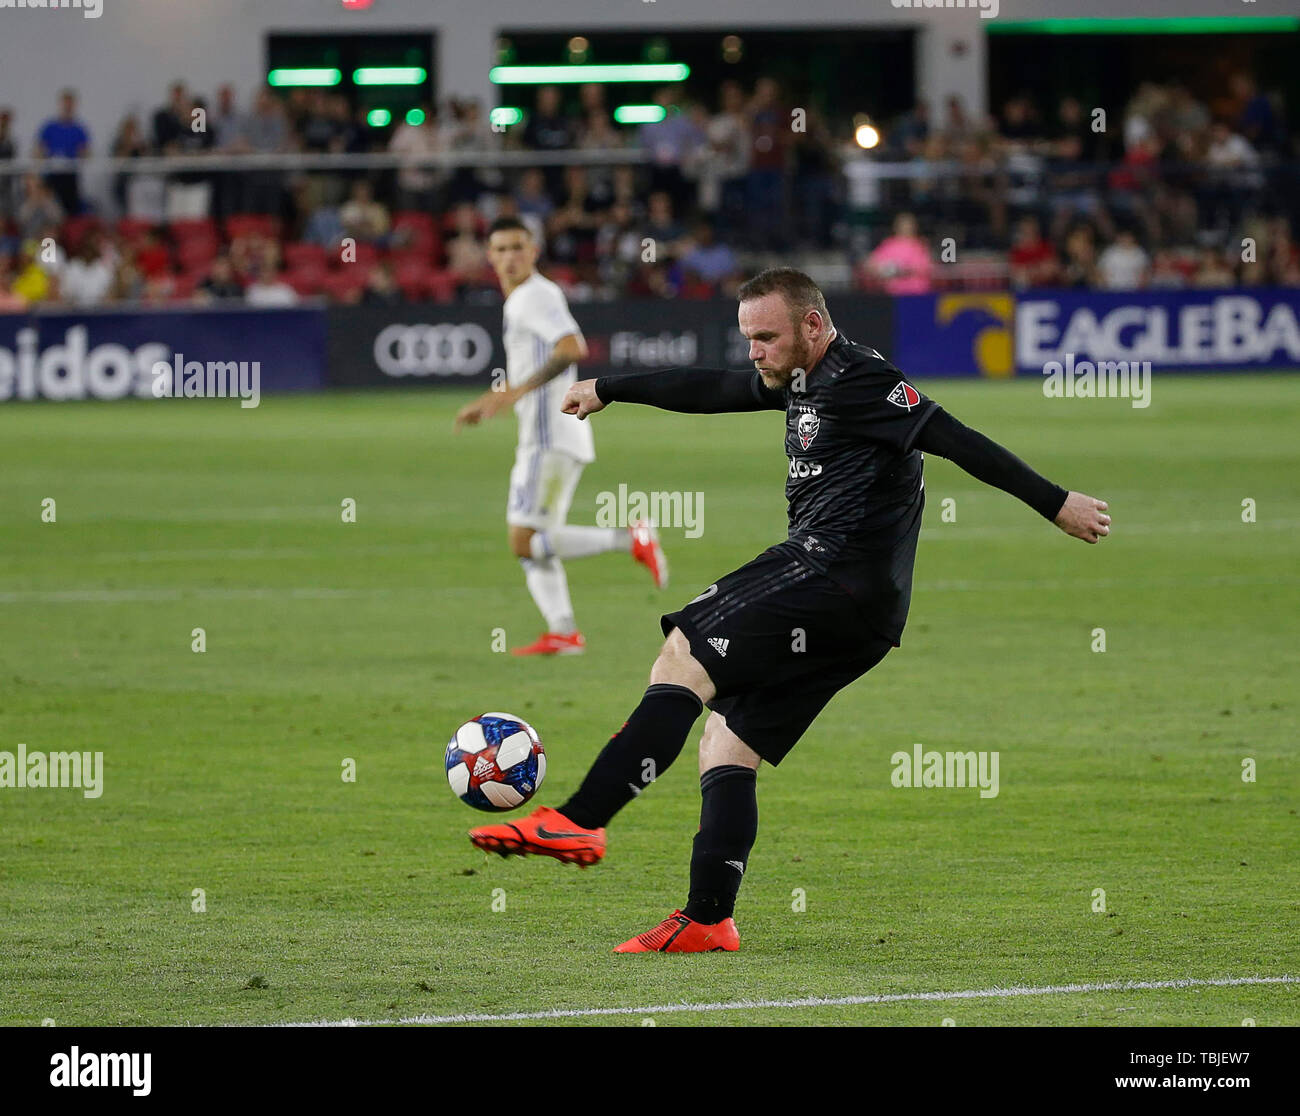 Washington DC, USA. 1st June, 2019. D.C. United Forward (9) Wayne Rooney clears the ball during an MLS soccer match between the D.C. United and the San Jose Earthquakes at Audi Field in Washington DC. Justin Cooper/CSM/Alamy Live News Stock Photo